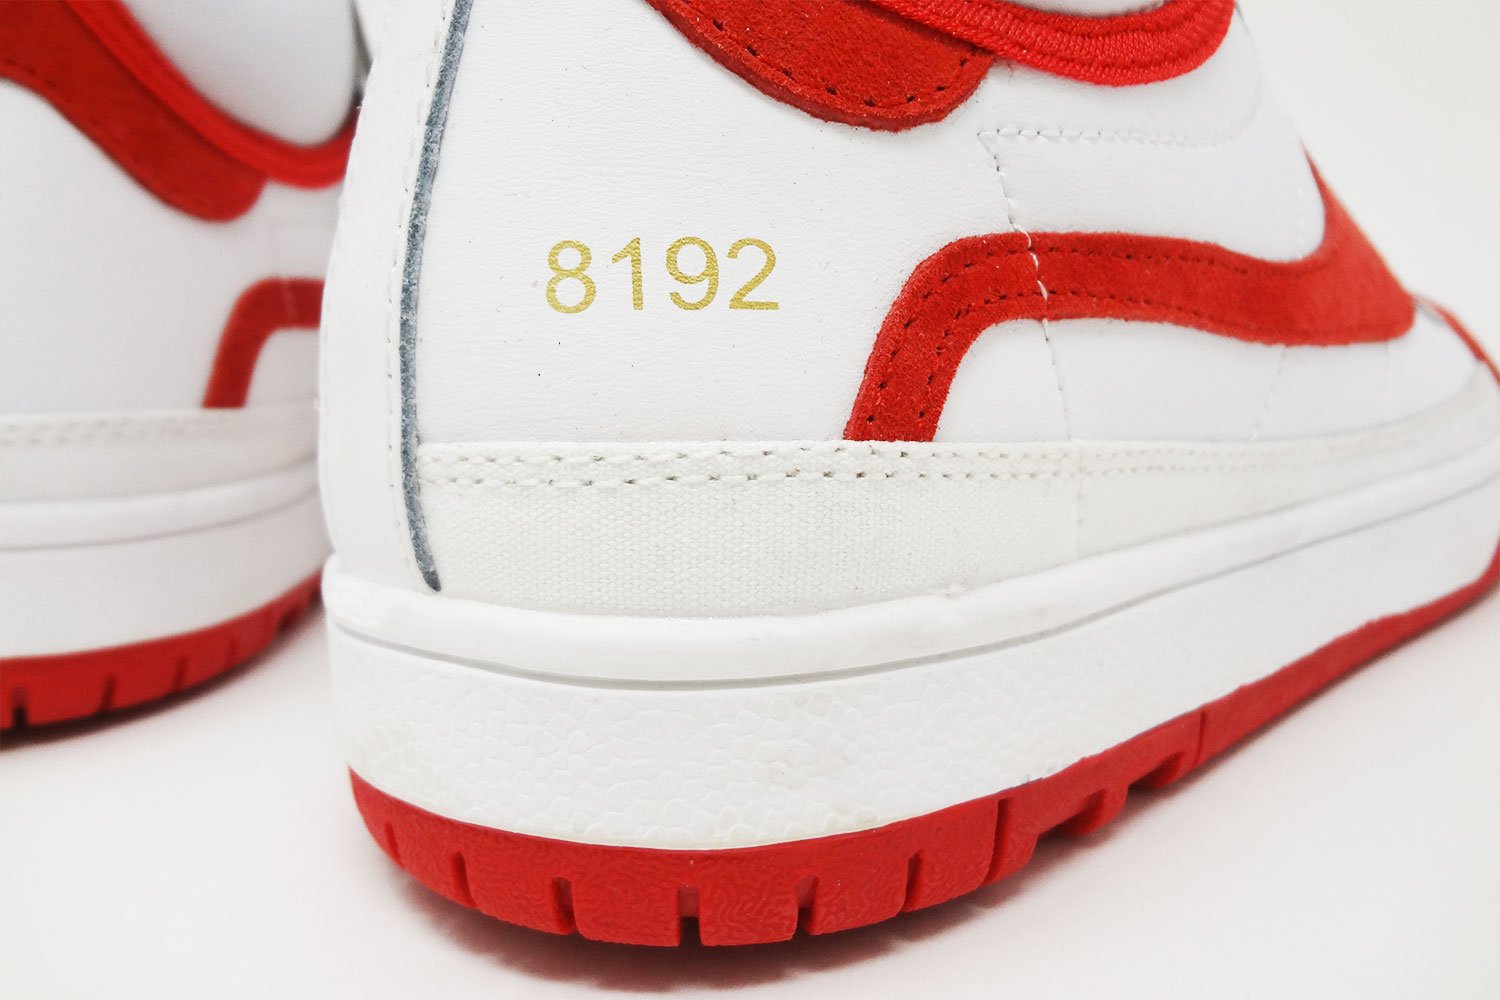 Jaclar The Intimidator Retro Basketball High Top Sneakers detail @ The Deffest